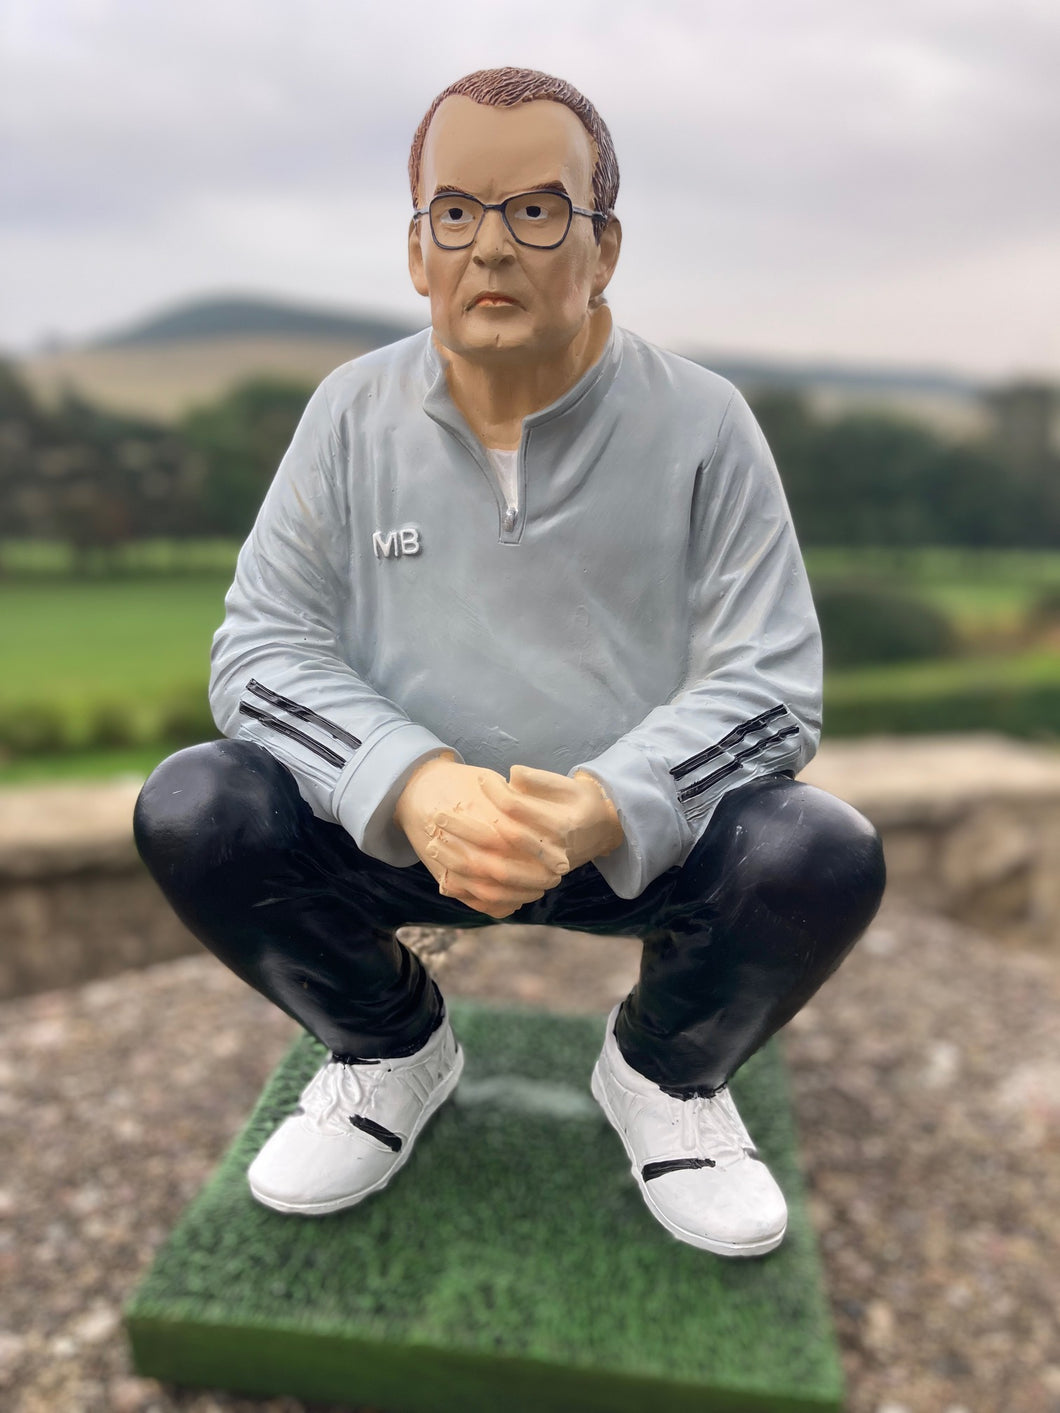 SOLD OUT! Limited Edition: Crouching El Loco | Marcelo Bielsa Inspired Statue